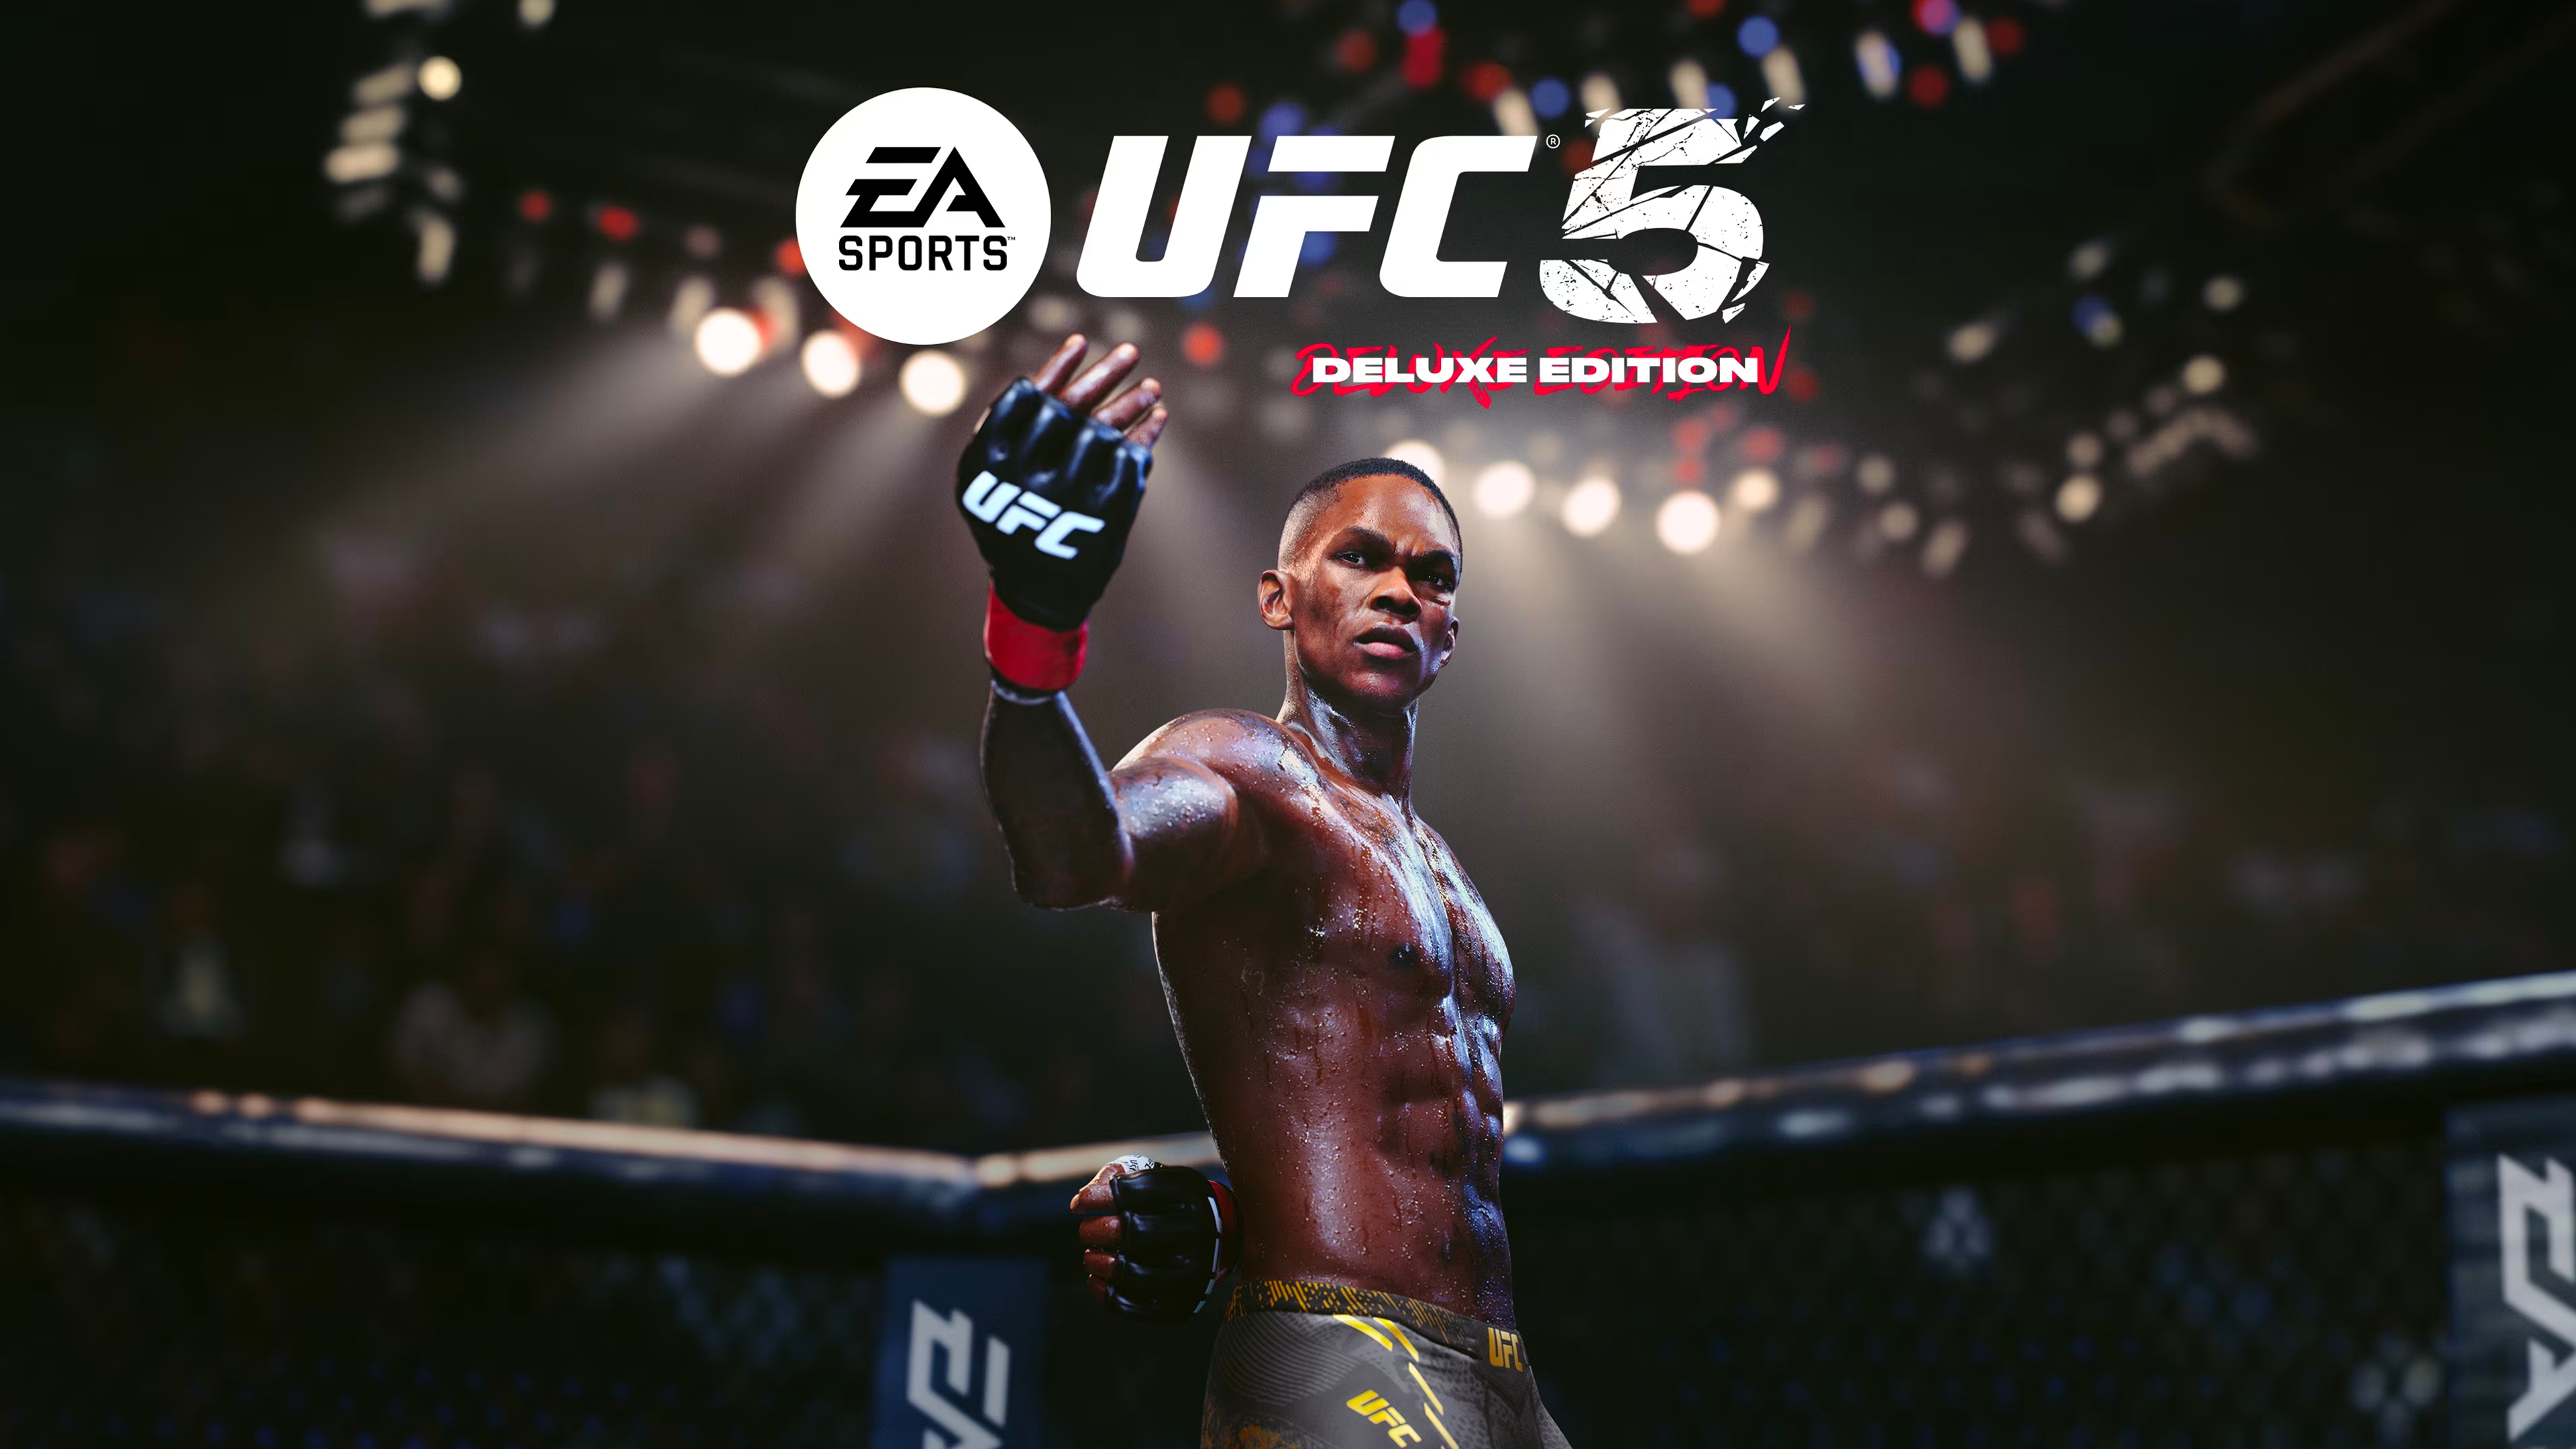 Buy EA Sports UFC 5 Deluxe Edition Xbox Series X|S Microsoft Store